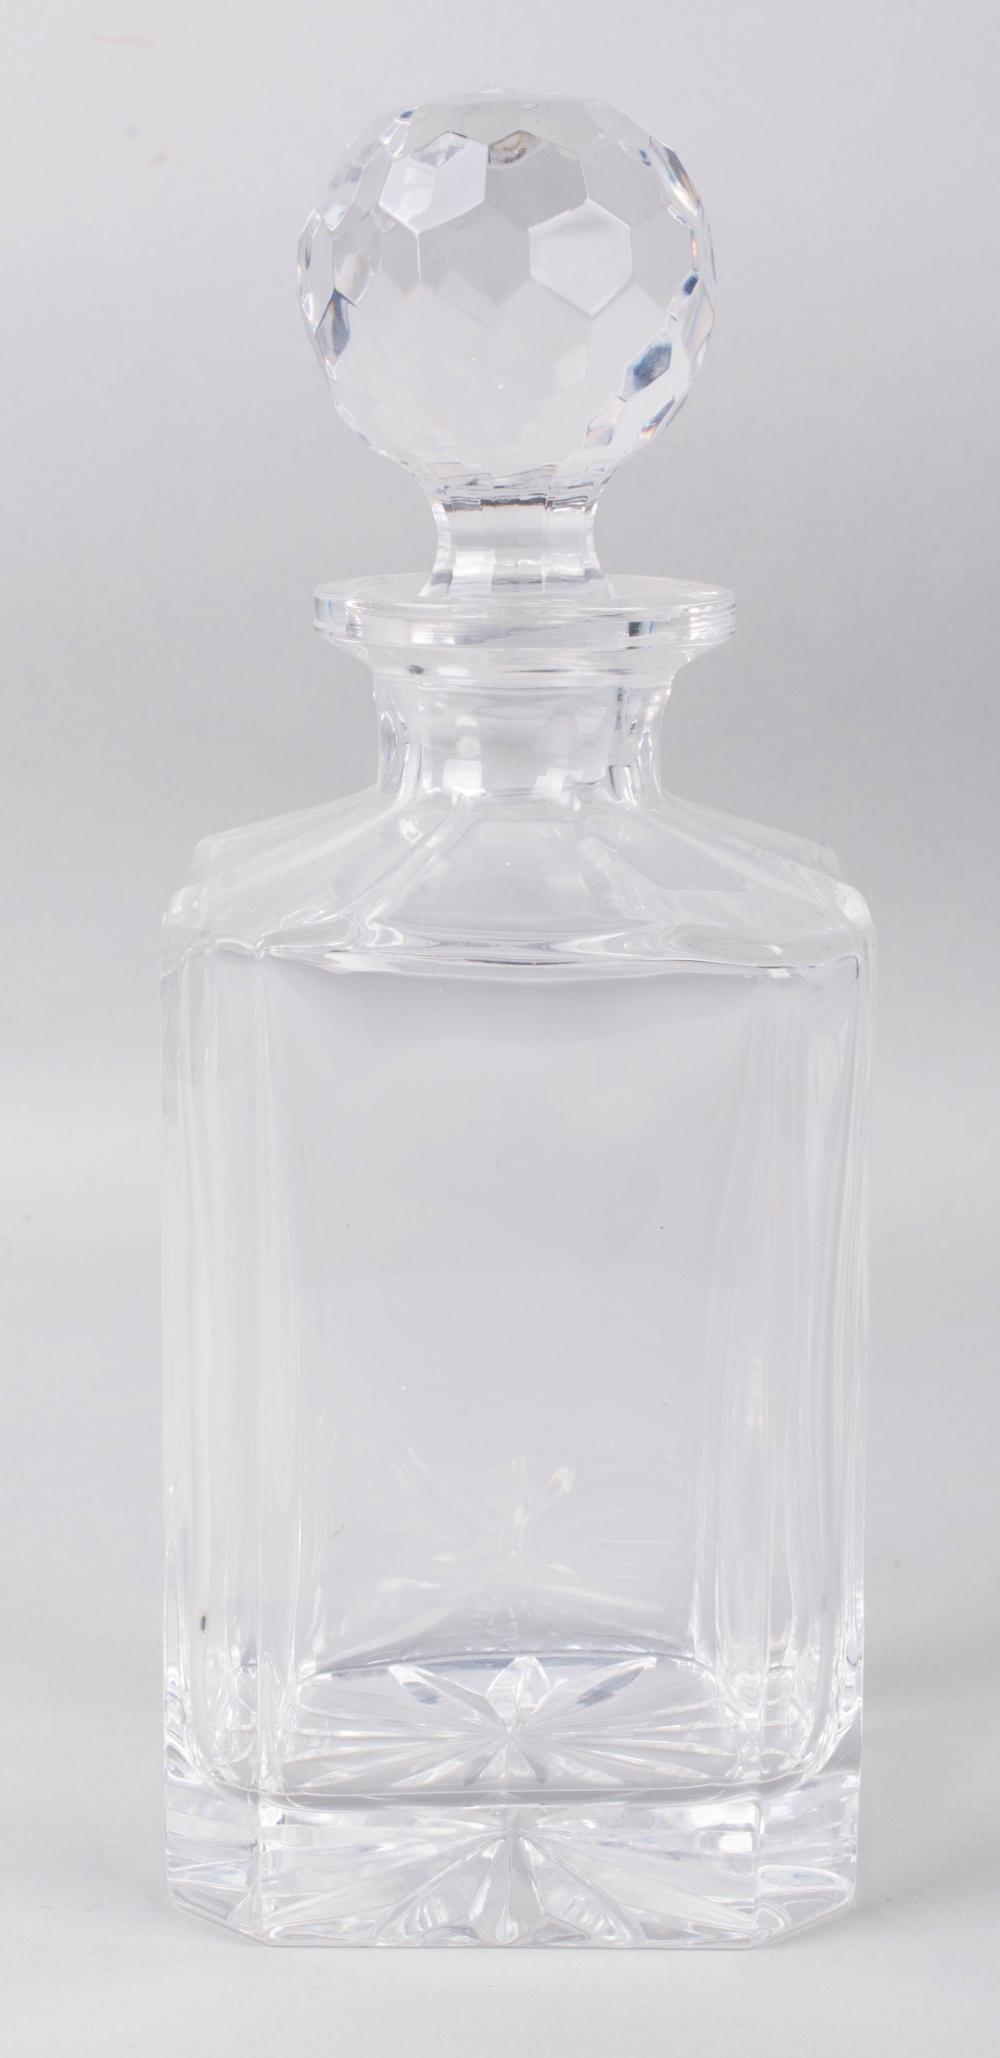 GLASS DECANTER FROM UNITED STATES 33ceb4